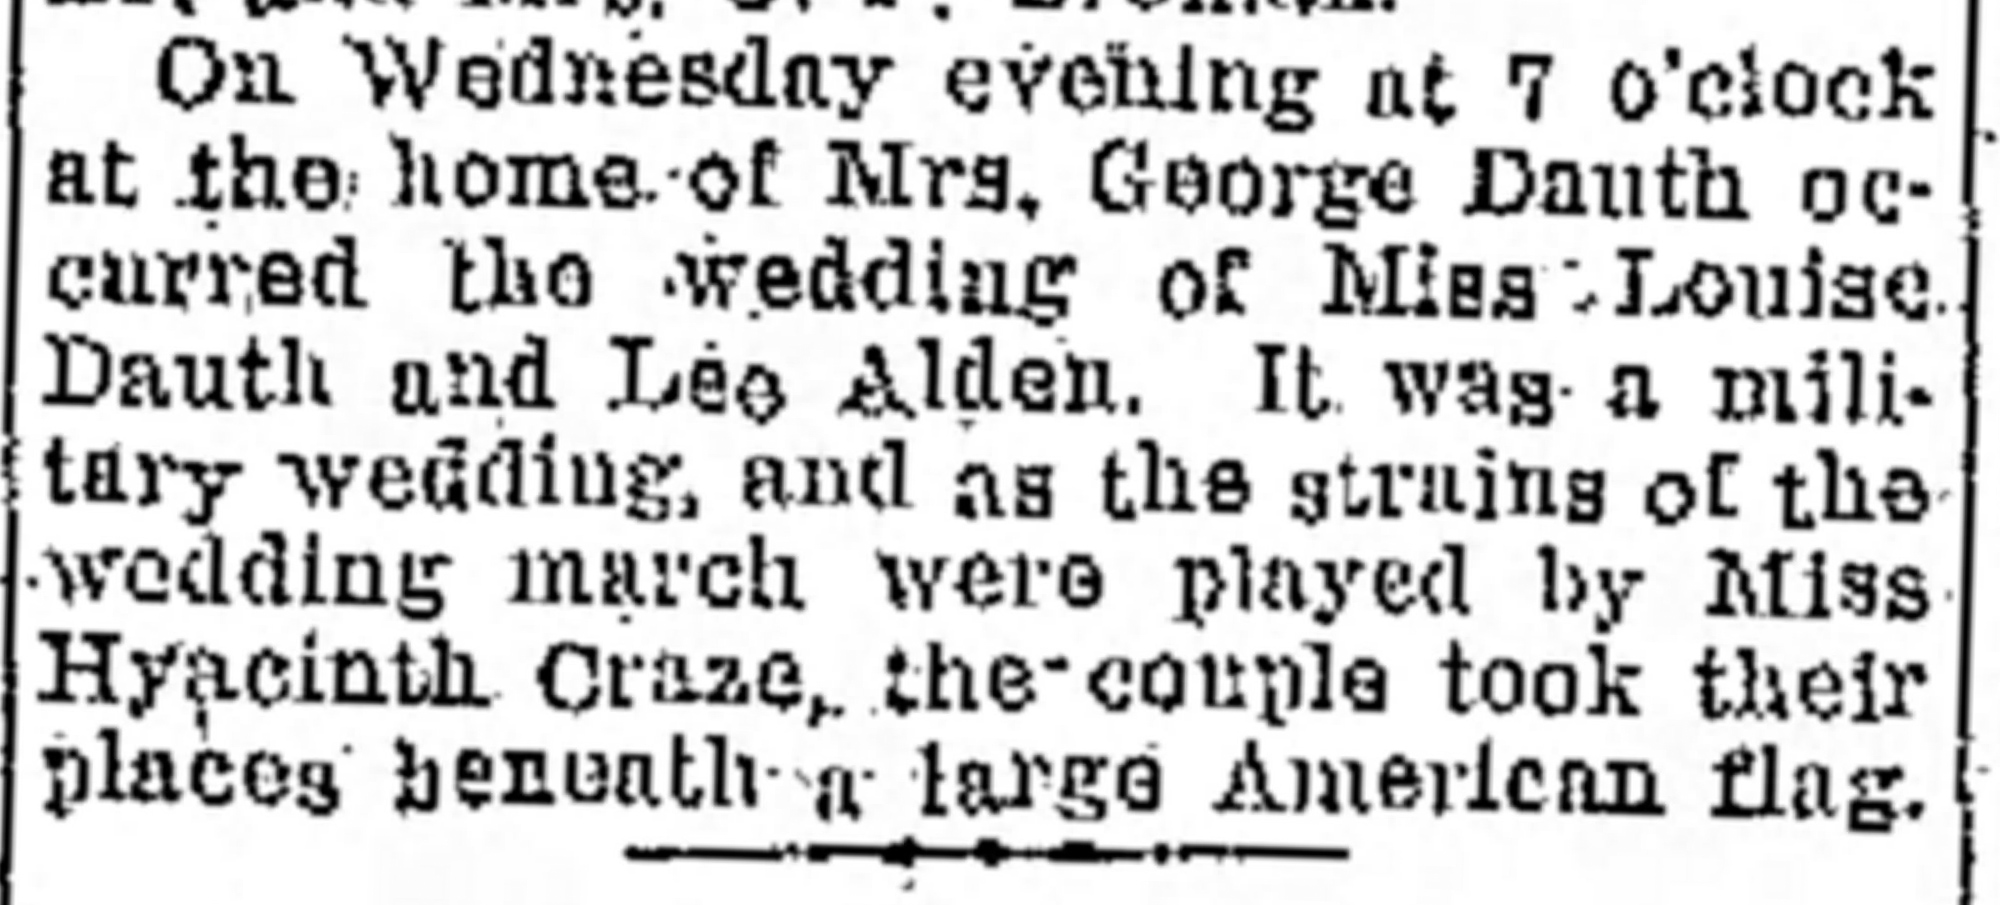 Dauth Family Archive - 1936-12-29 - Greeley Daily Tribune - Louise Dauth Wedding To Lee Alden